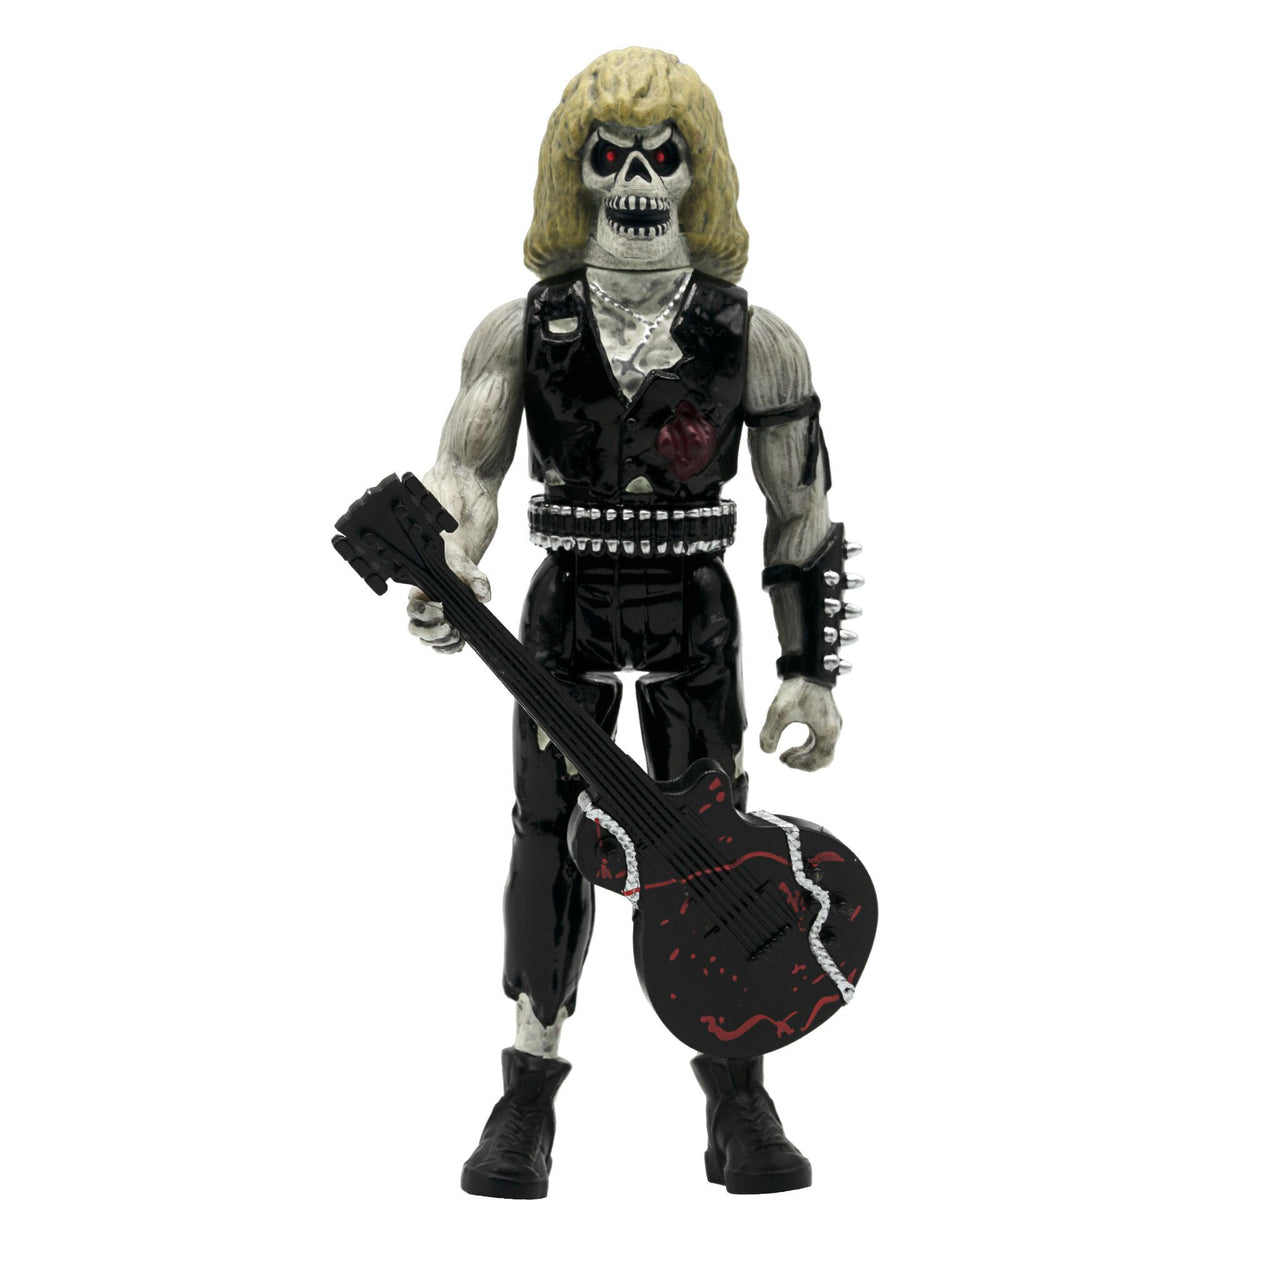 Slayer Live Undead Figurines by Super7